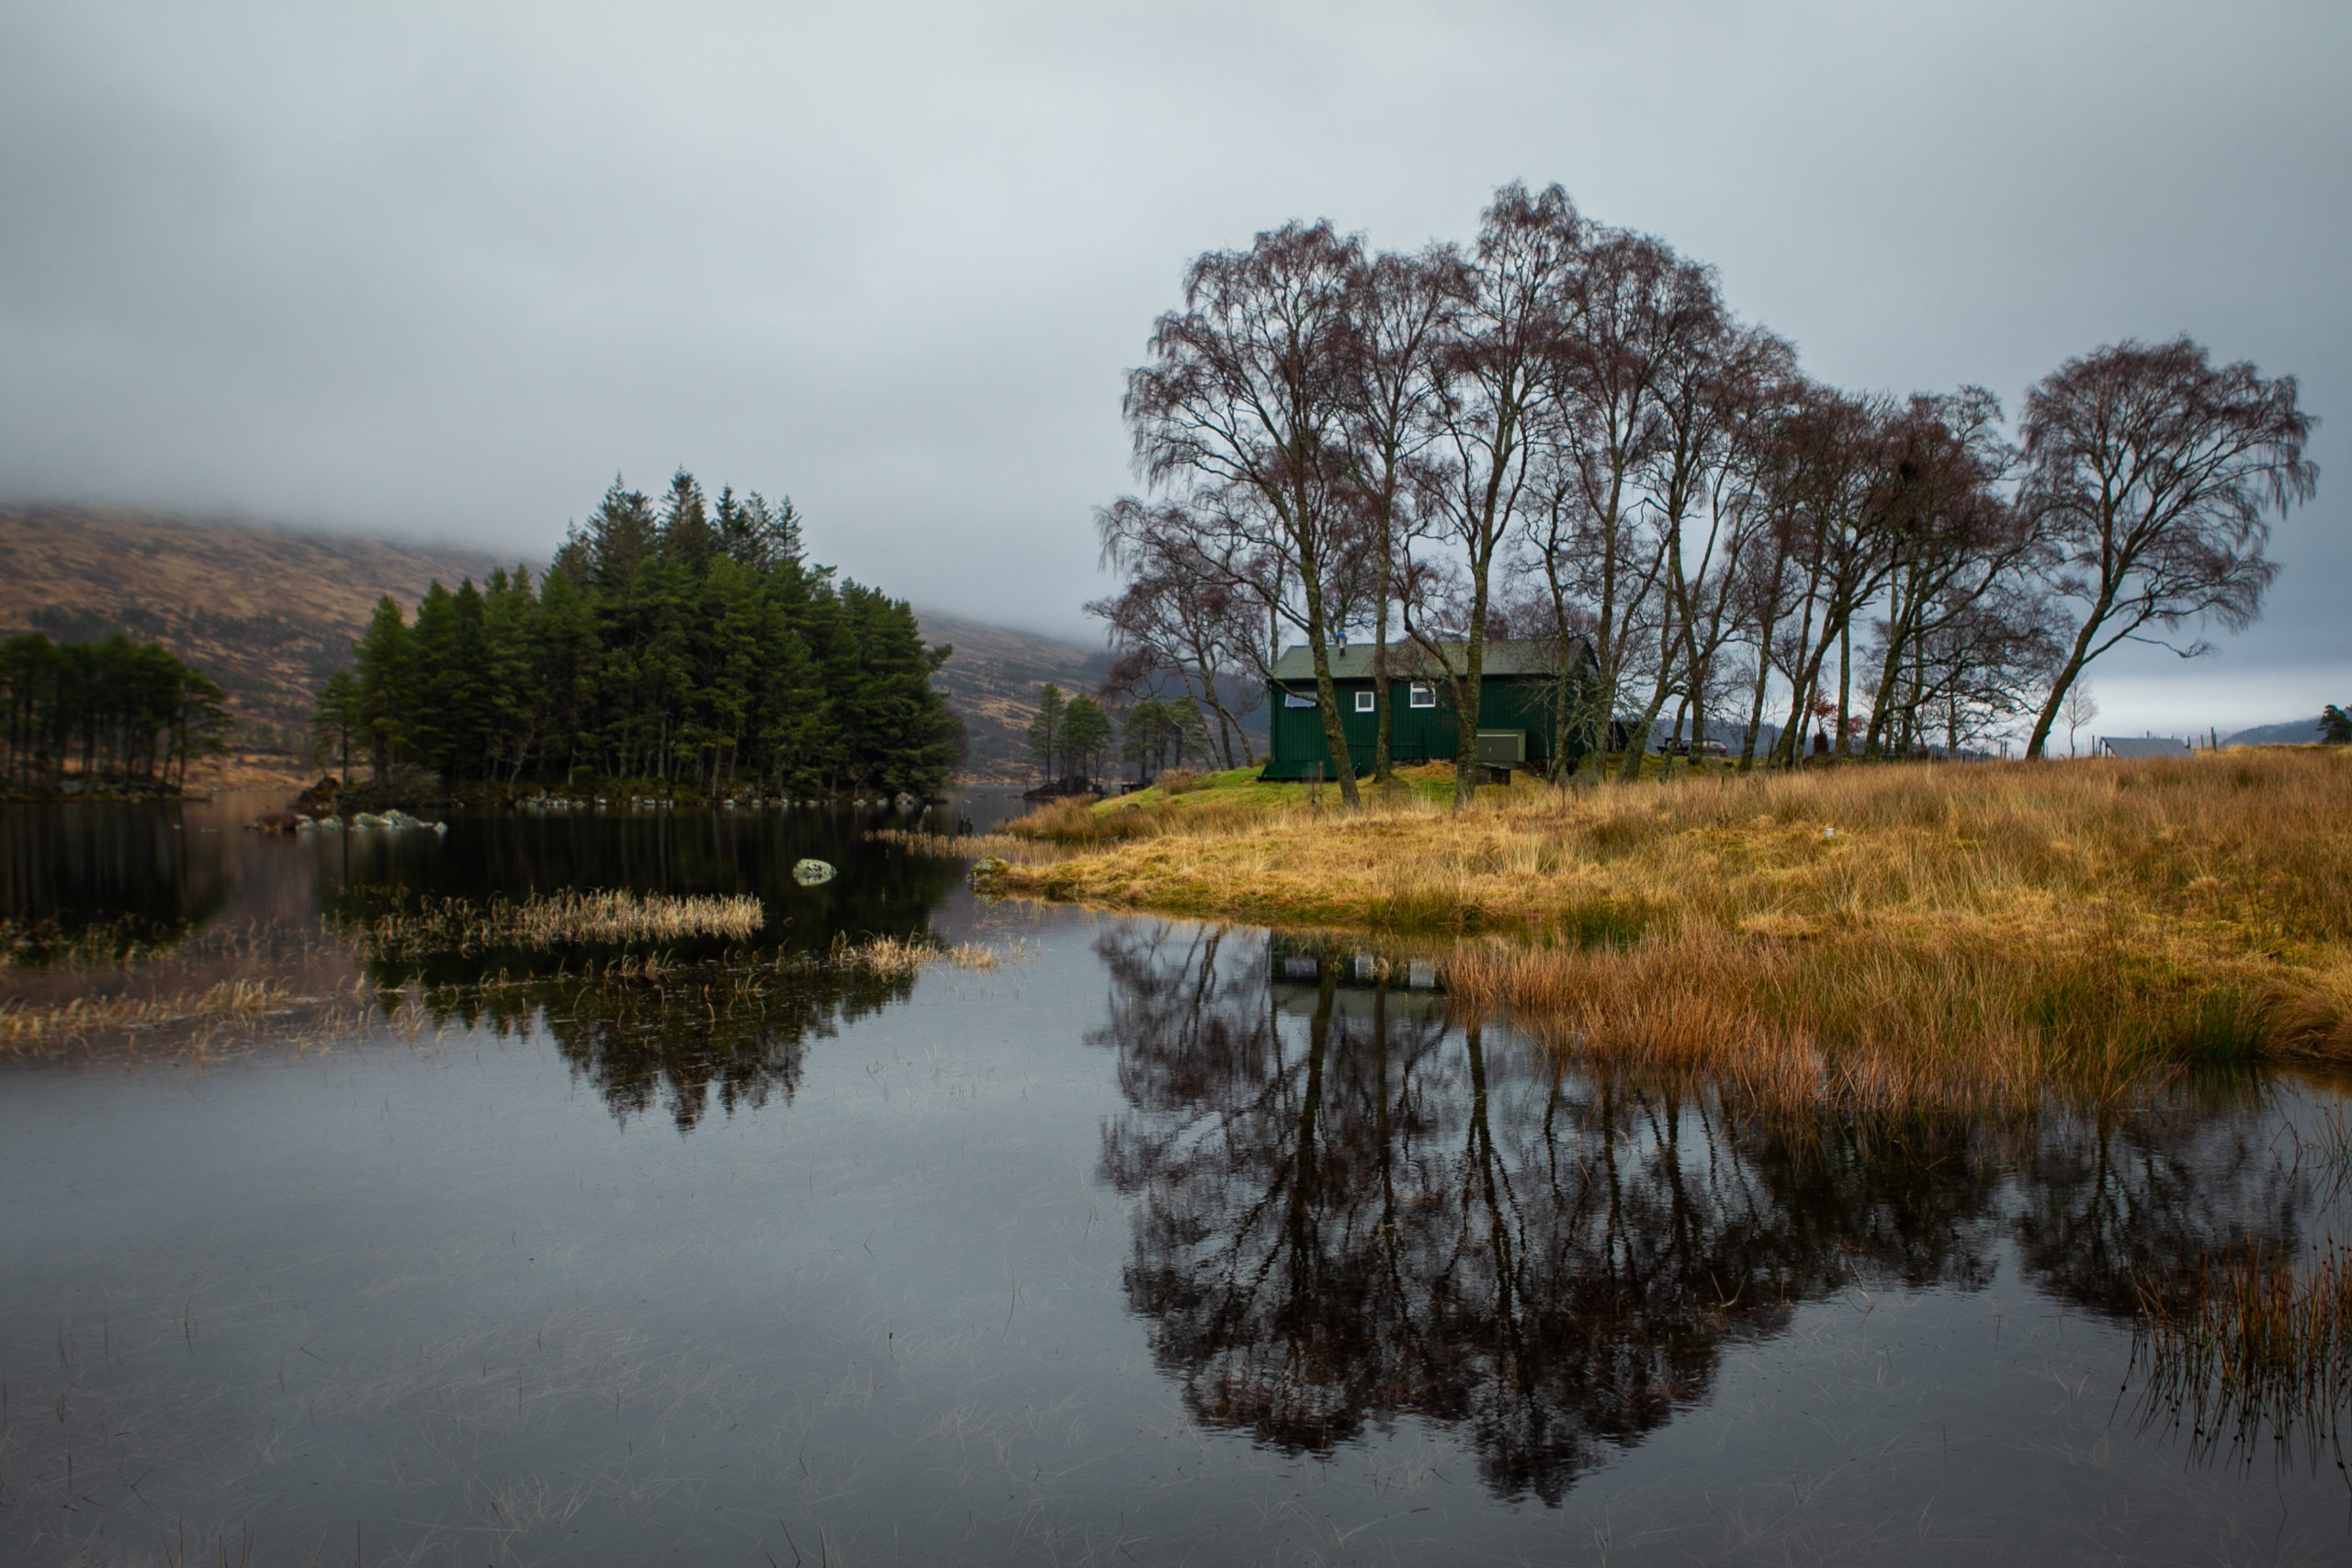 The remote Loch Ossian Youth Hostel